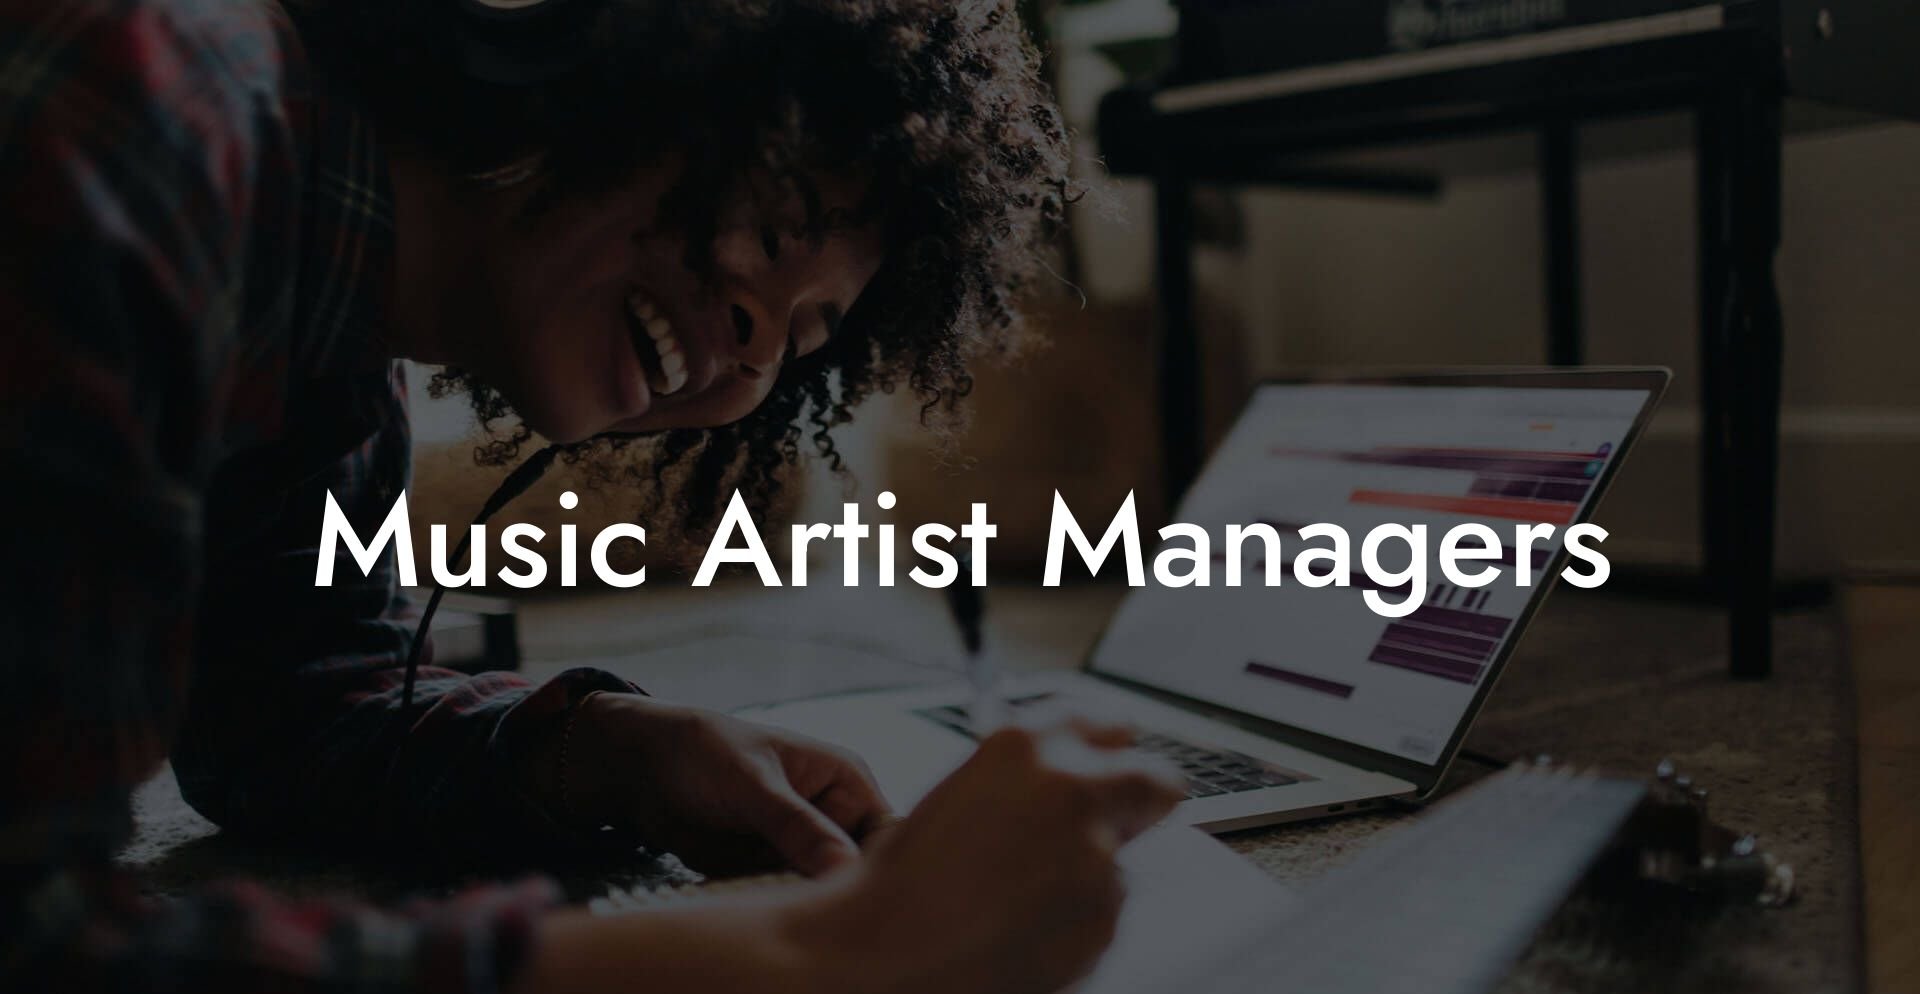 Music Artist Managers